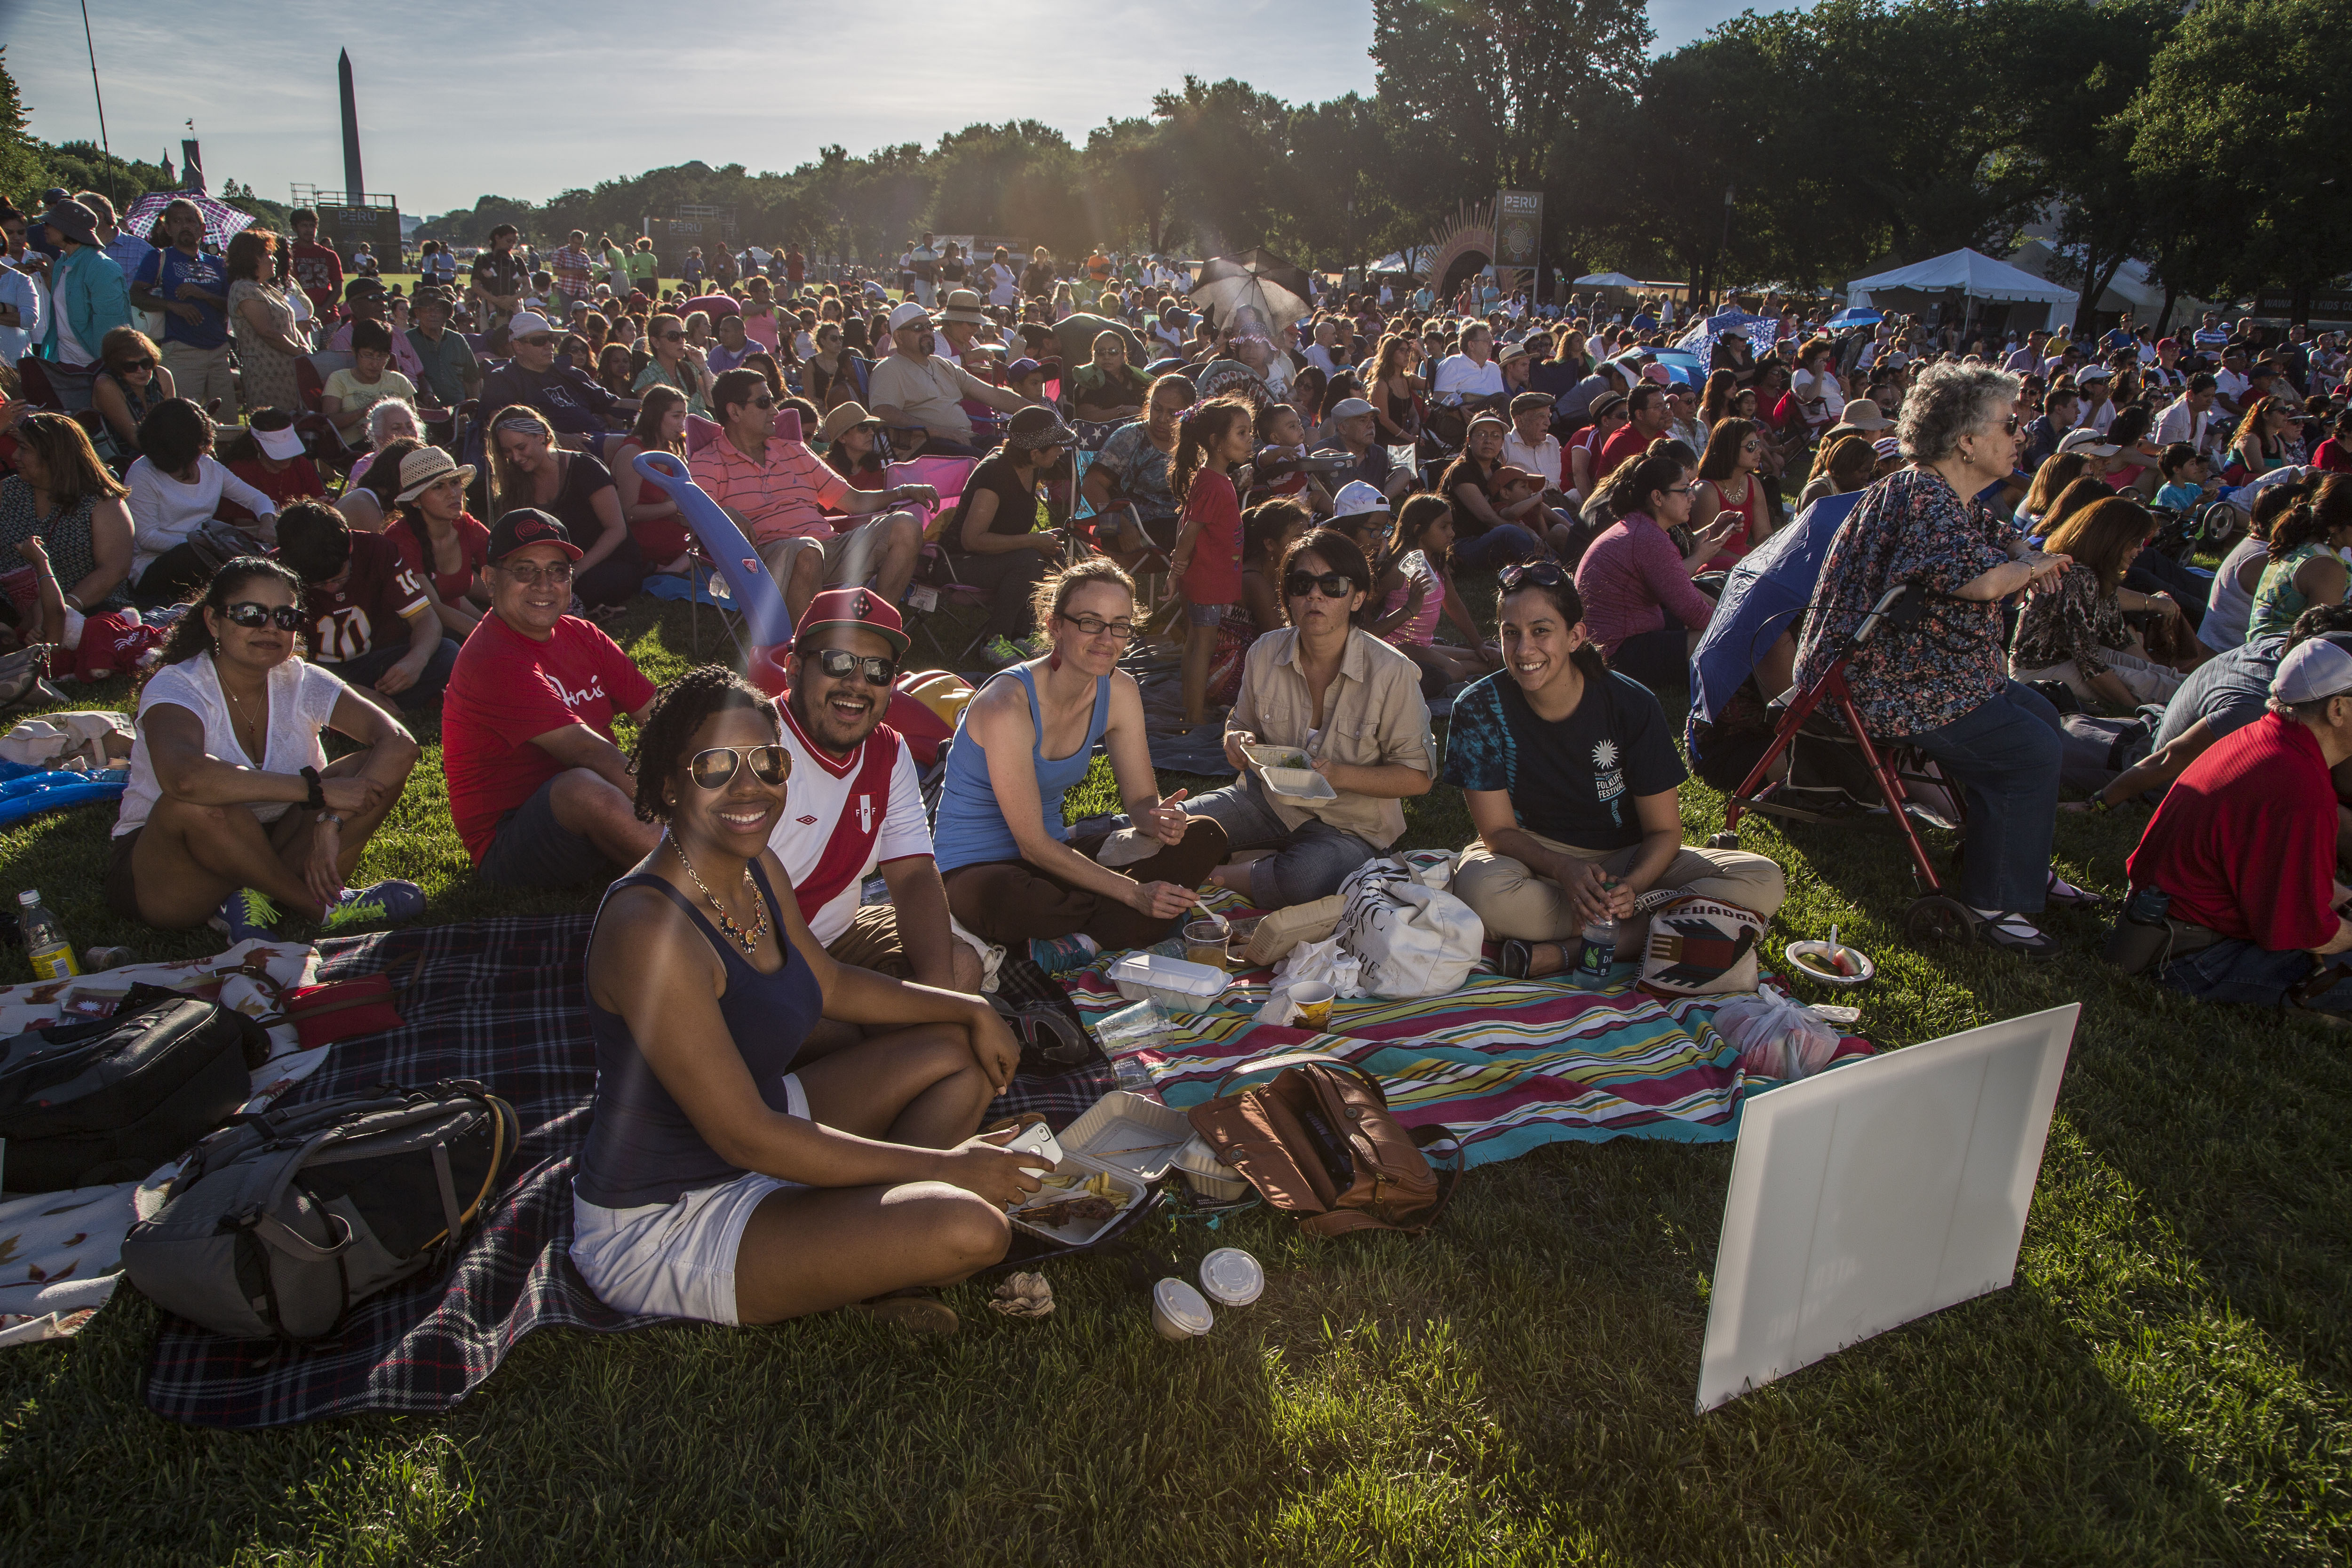 Visitors enjoy an evening concert at the 2015 Smithsonian Folklife Festival. Photo by Francisco Guerra, Ralph Rinzler Folklife Archives